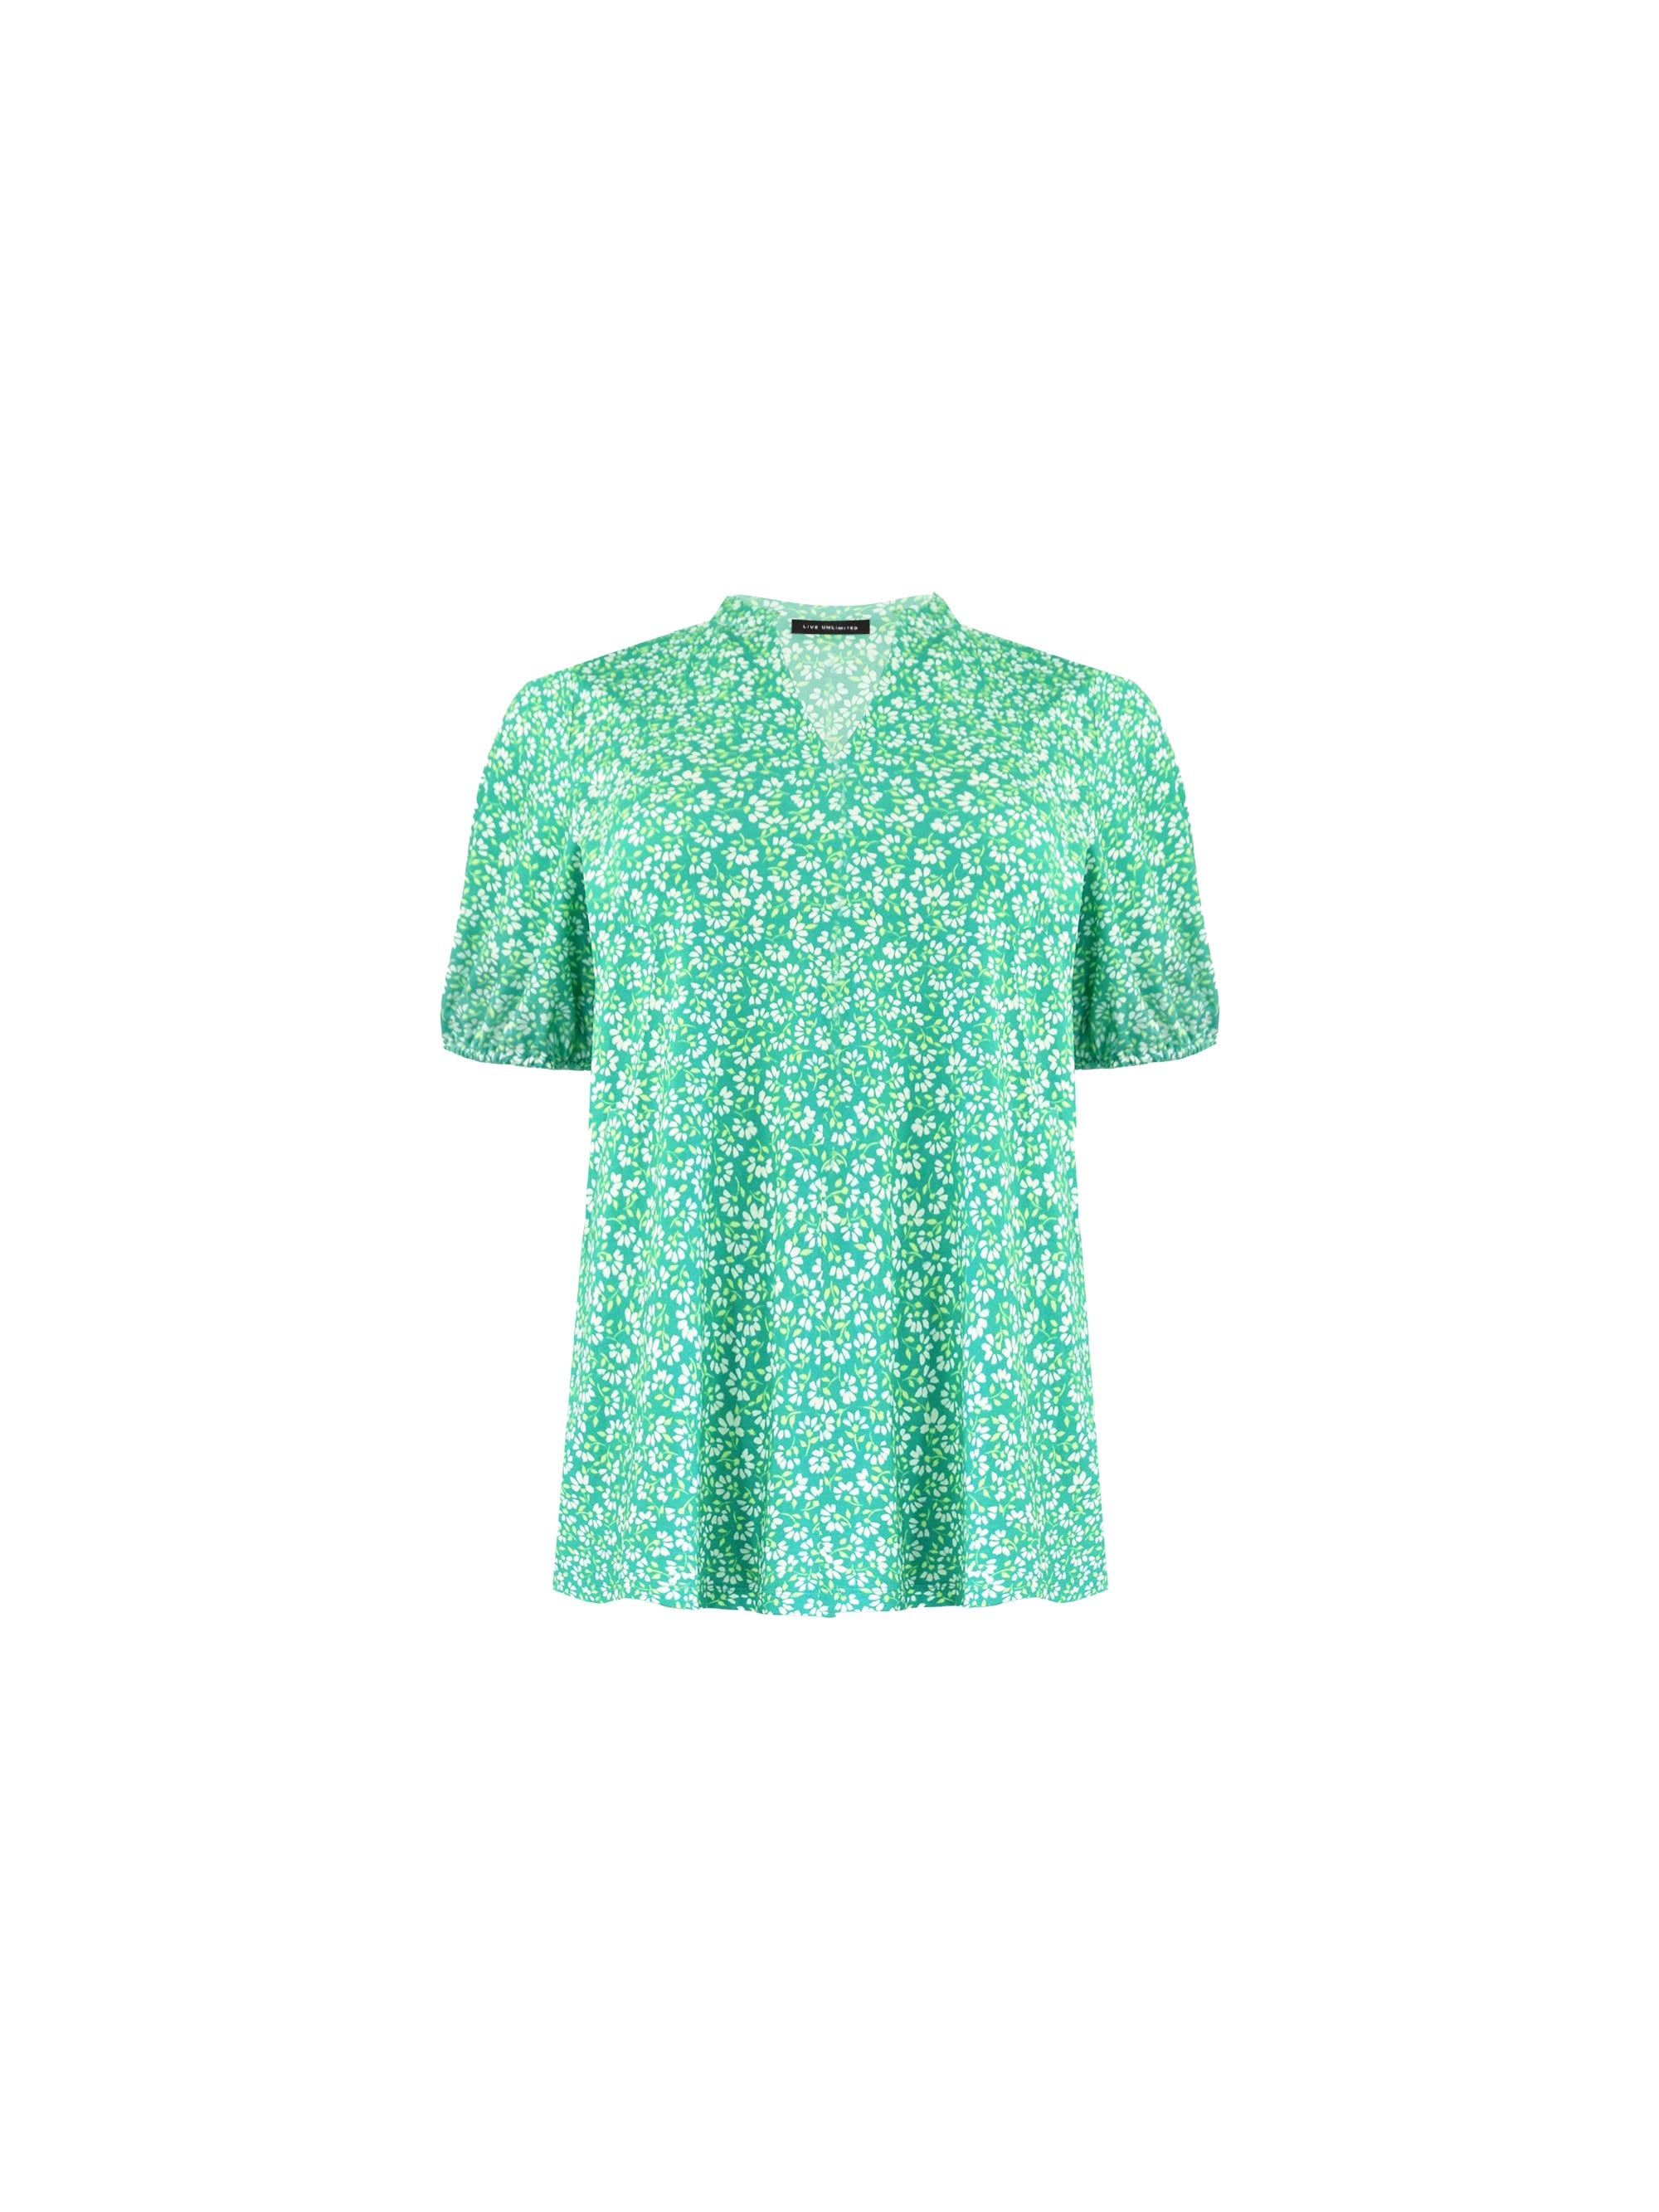 Green Ditsy Jersey Blouse